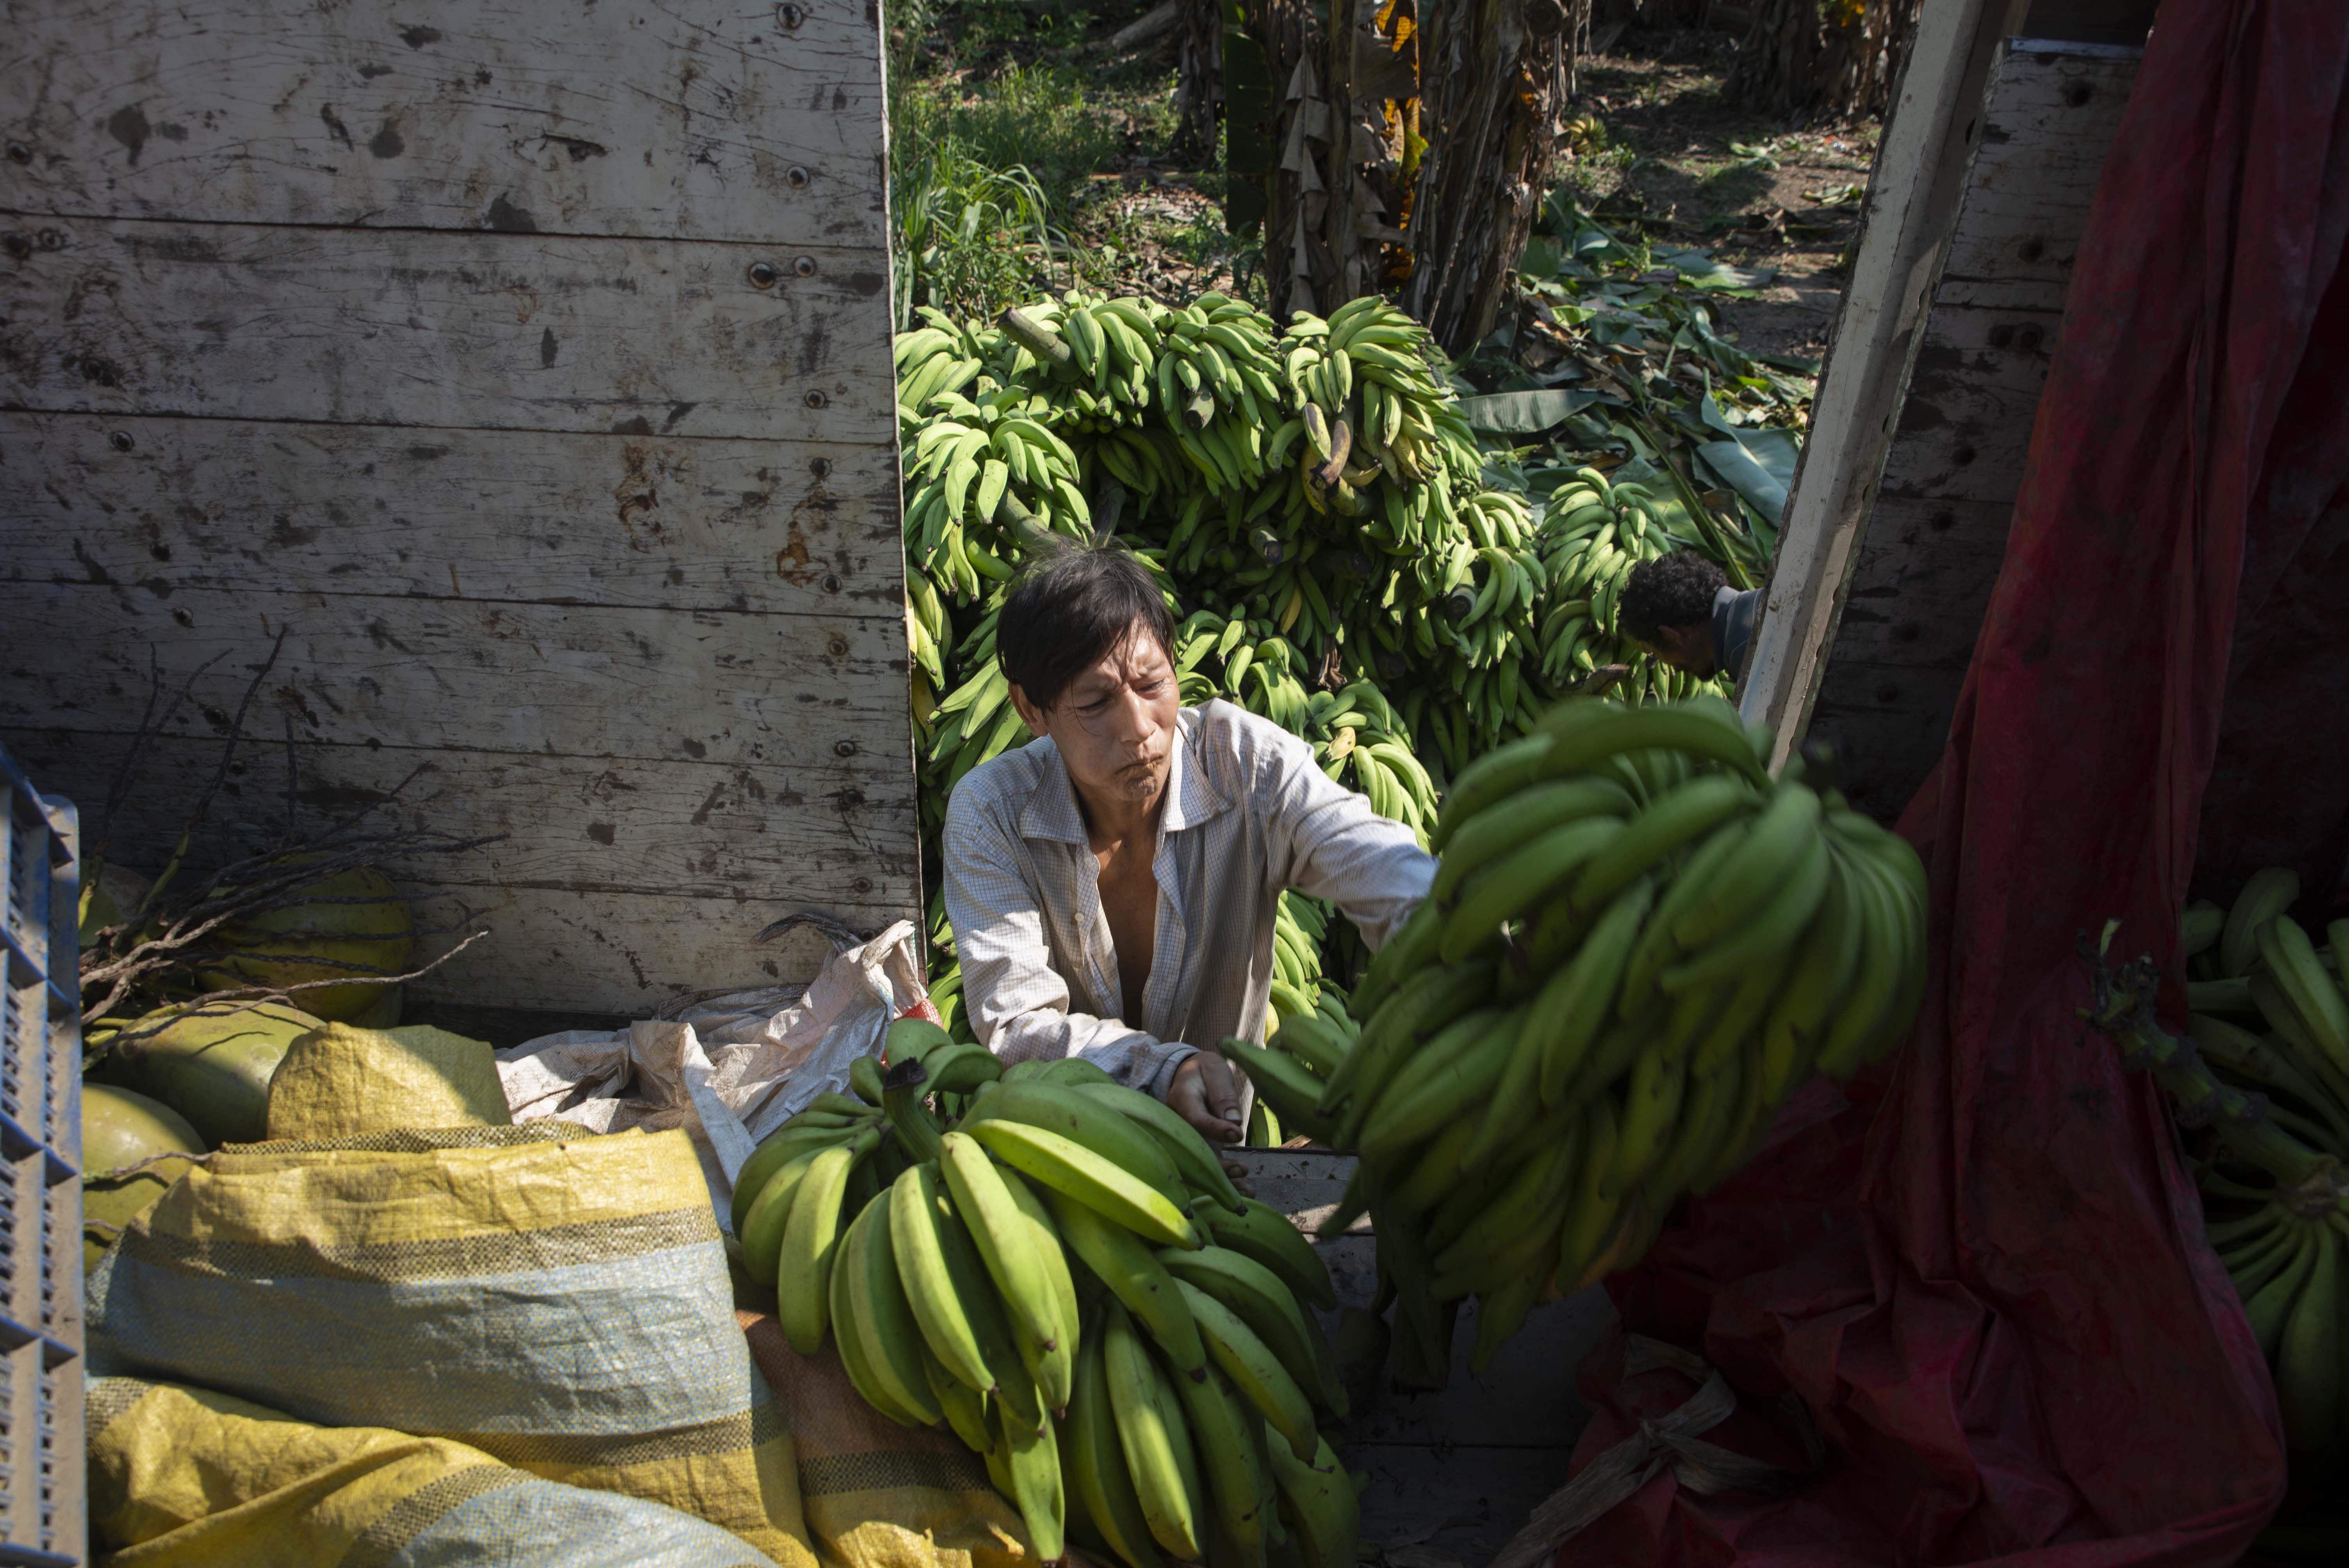 A Yuqui villager helps to load a shipment of harvested bananas to be able to sell them in Cochabamba. Since the arrival of the Covid-19 pandemic, their market has been reduced to a single buyer who enters Bia Recuate once a month. Photo by Sara Aliaga. Bolivia, 2020.